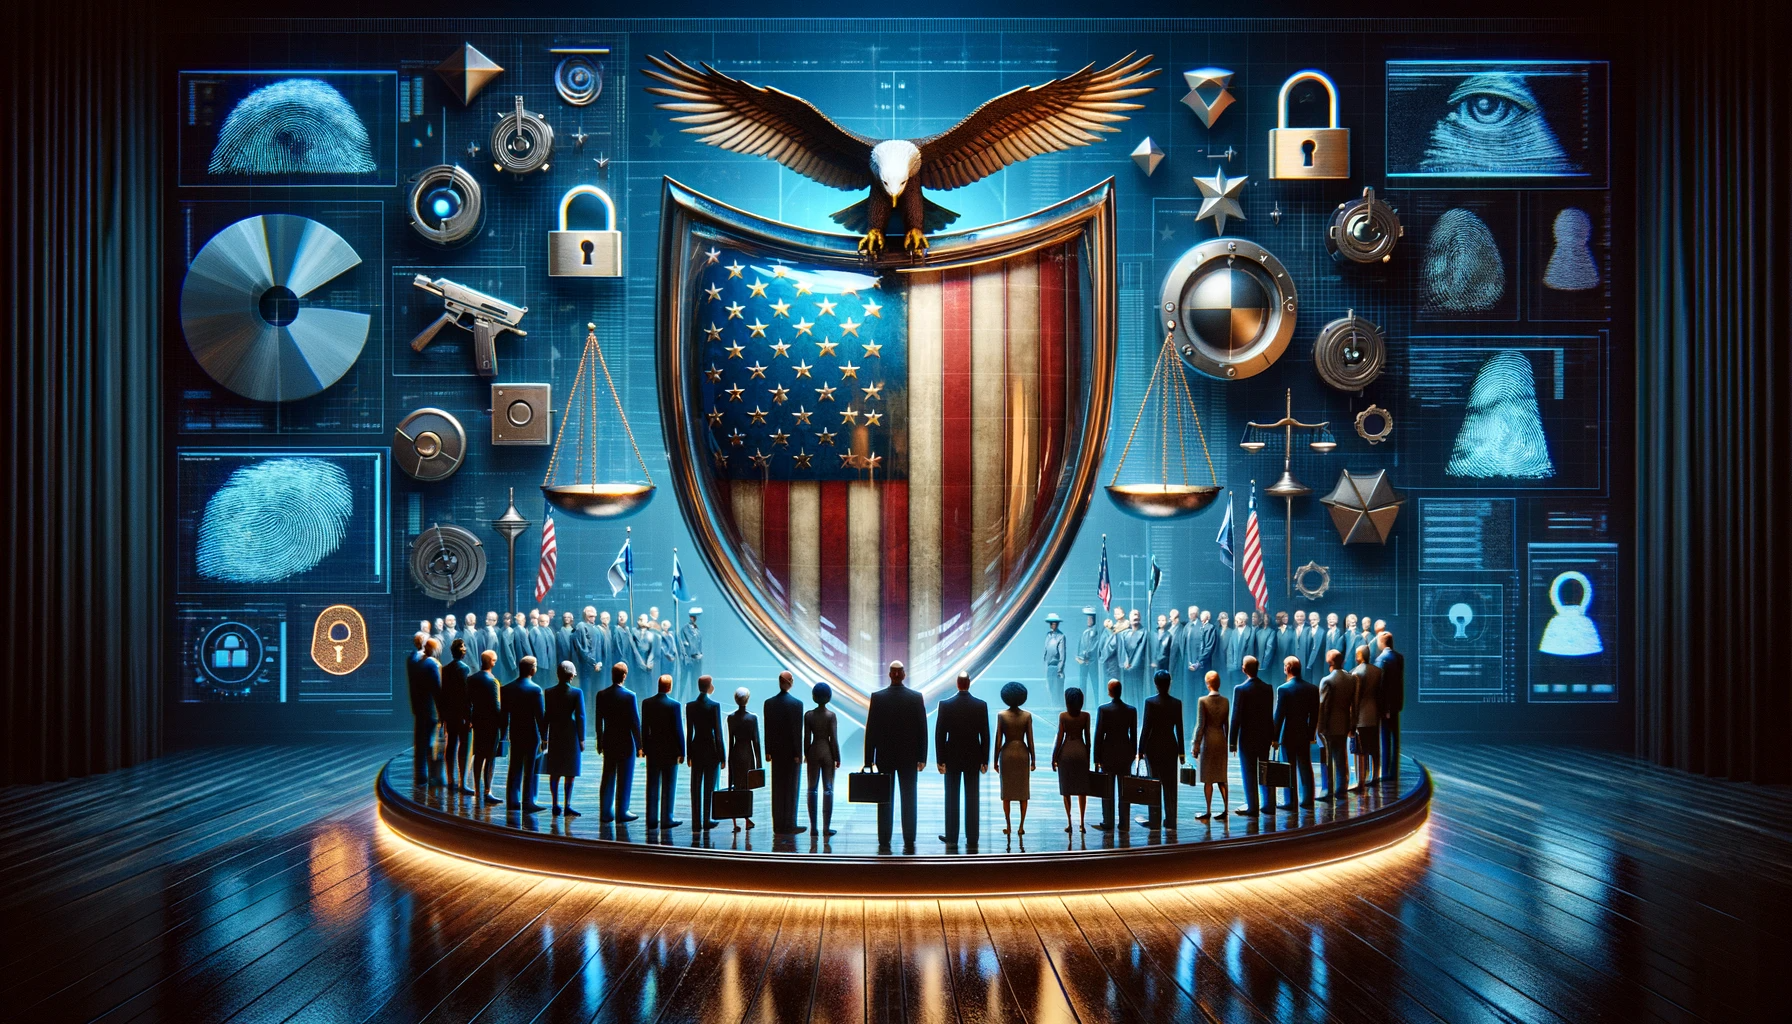 A shield with an American flag and the scales of justice shown with many items related to privacy and security